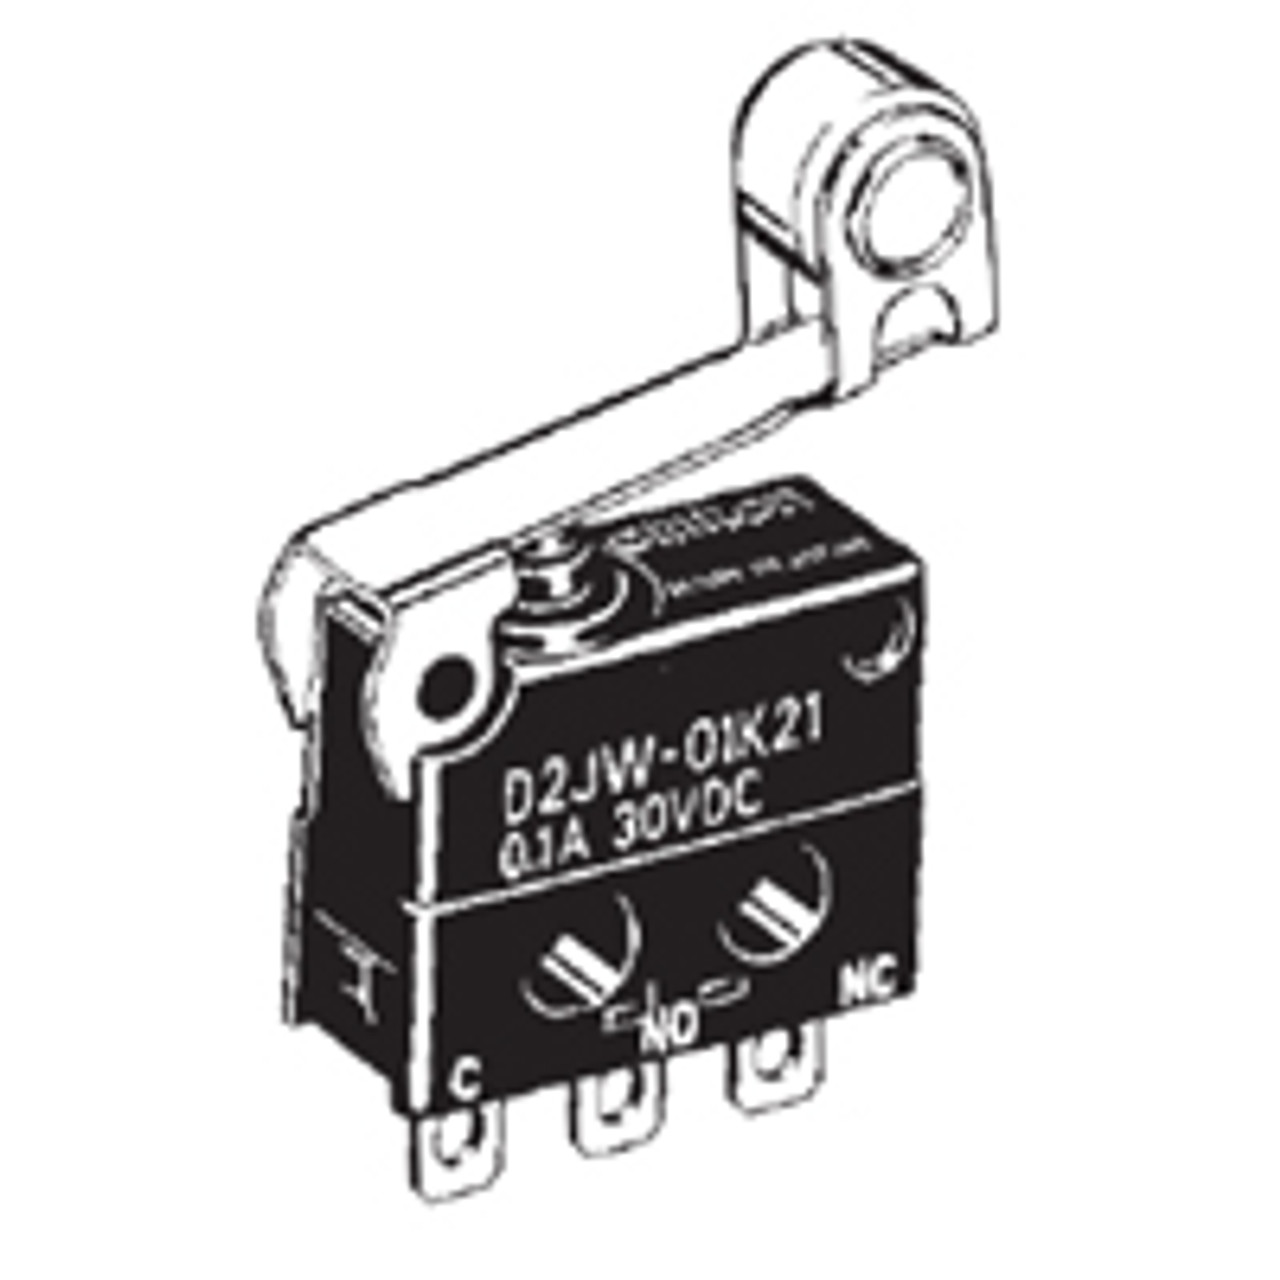 Omron D2JW-01K21 Snap-Action Switches